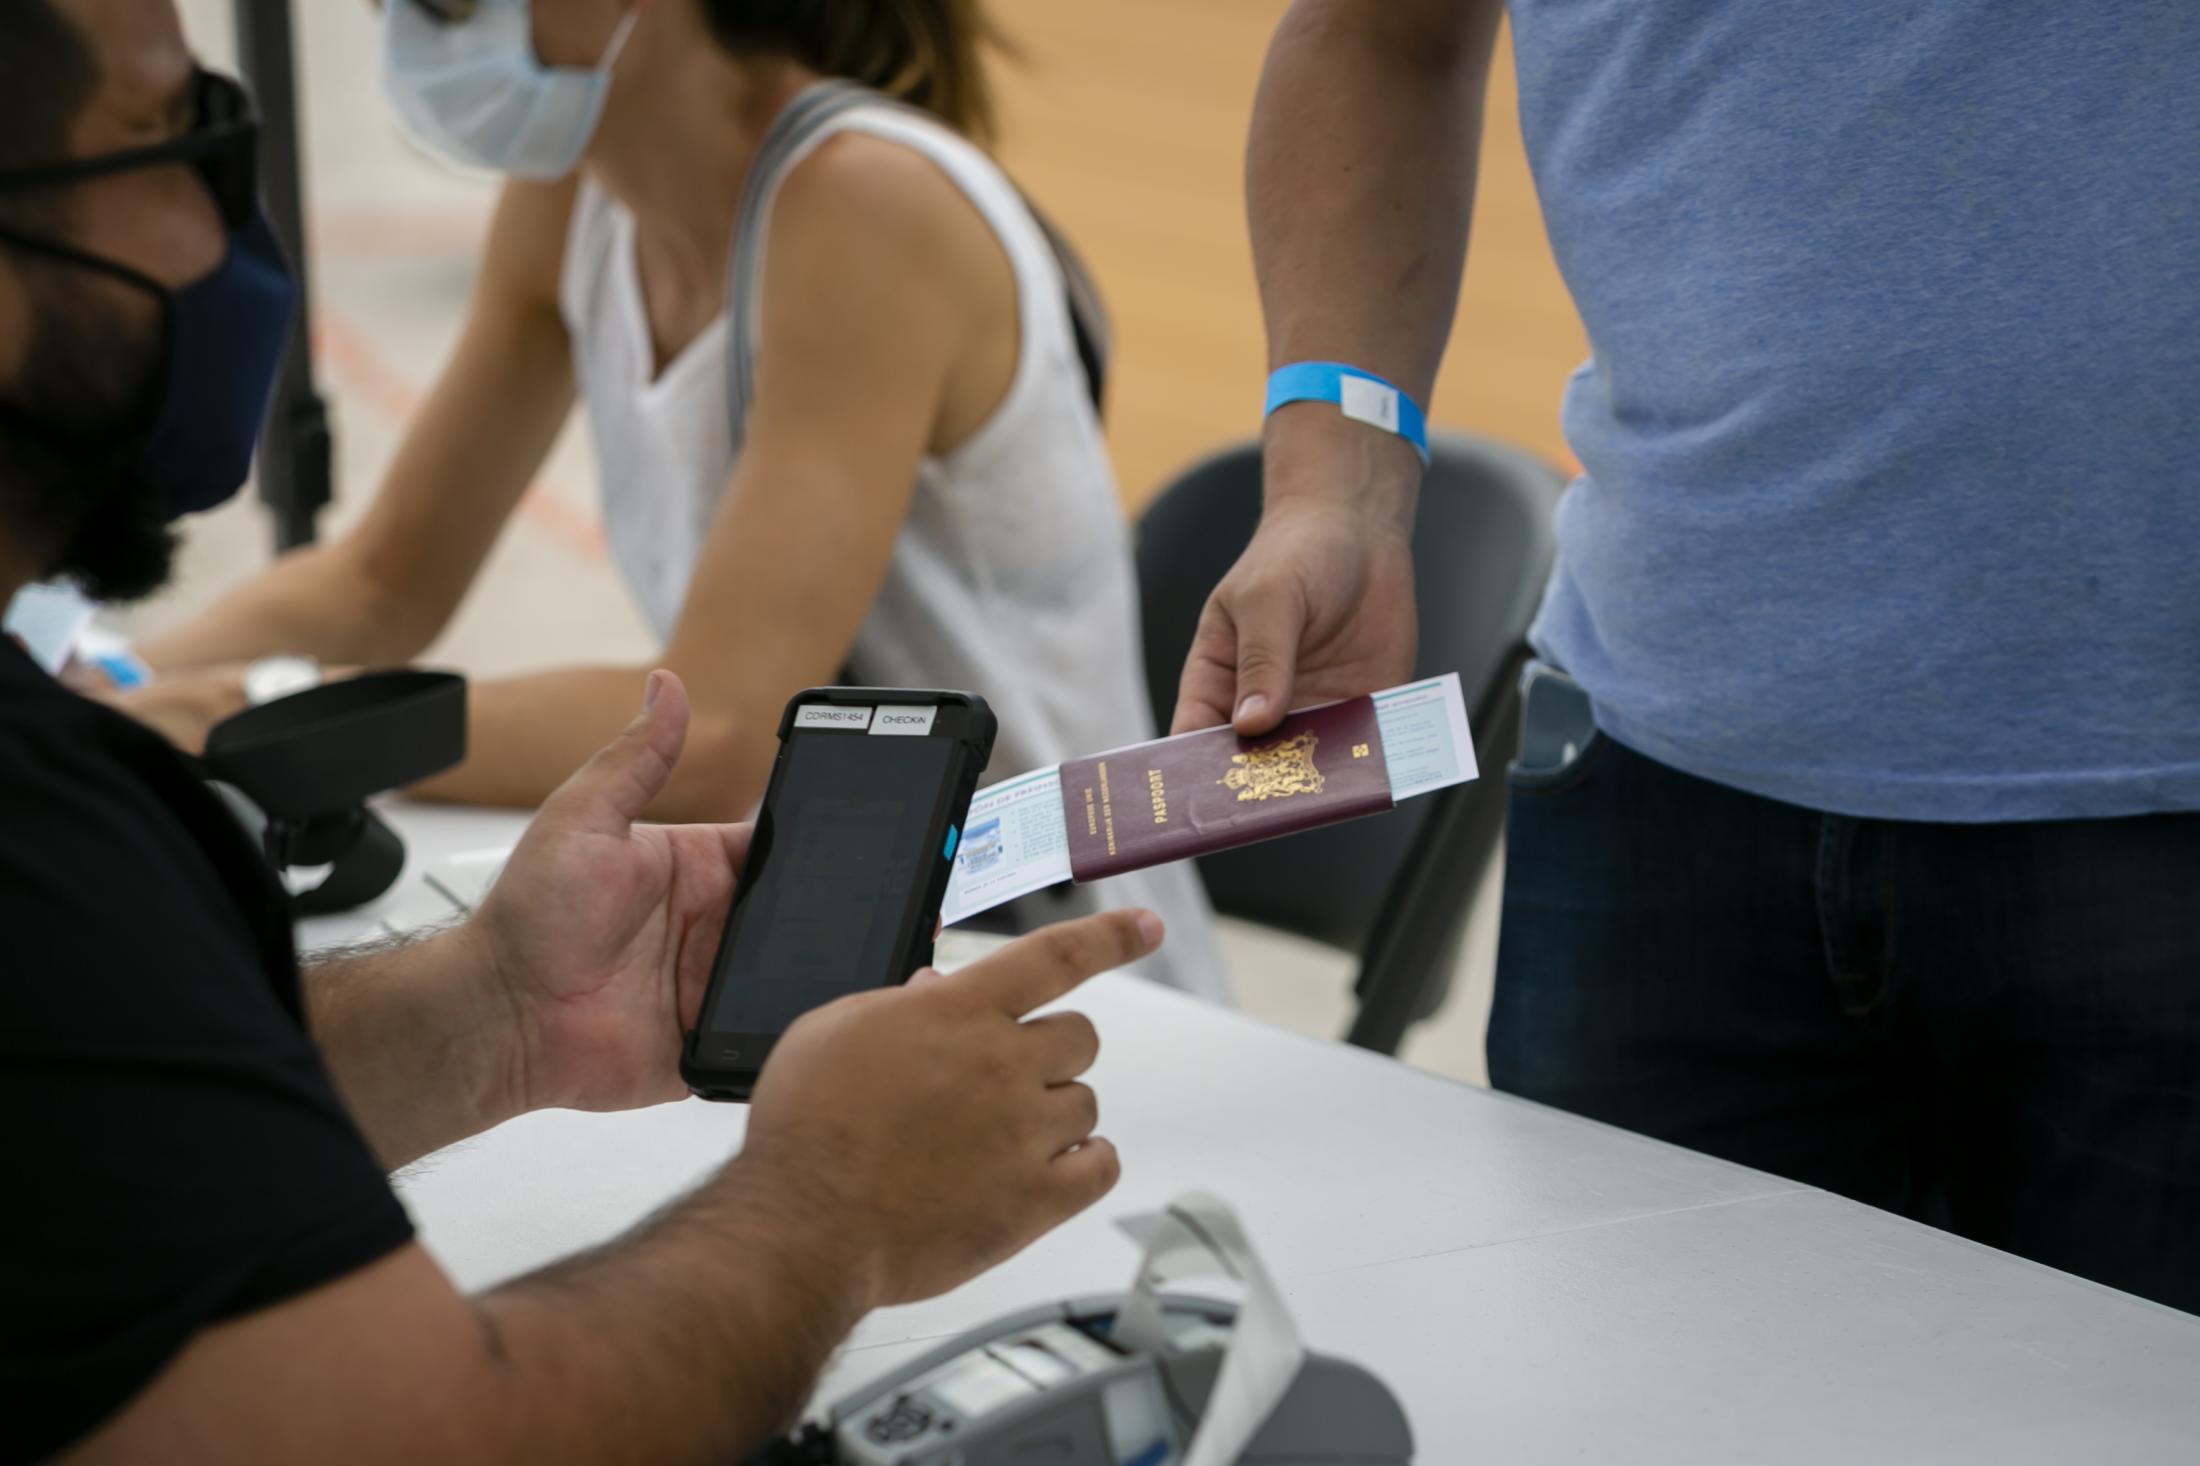 Tourists get Johnson & Johnson COVID-19 vaccine at Miami Beach - A man gives his passport for registration  to get Johnson...